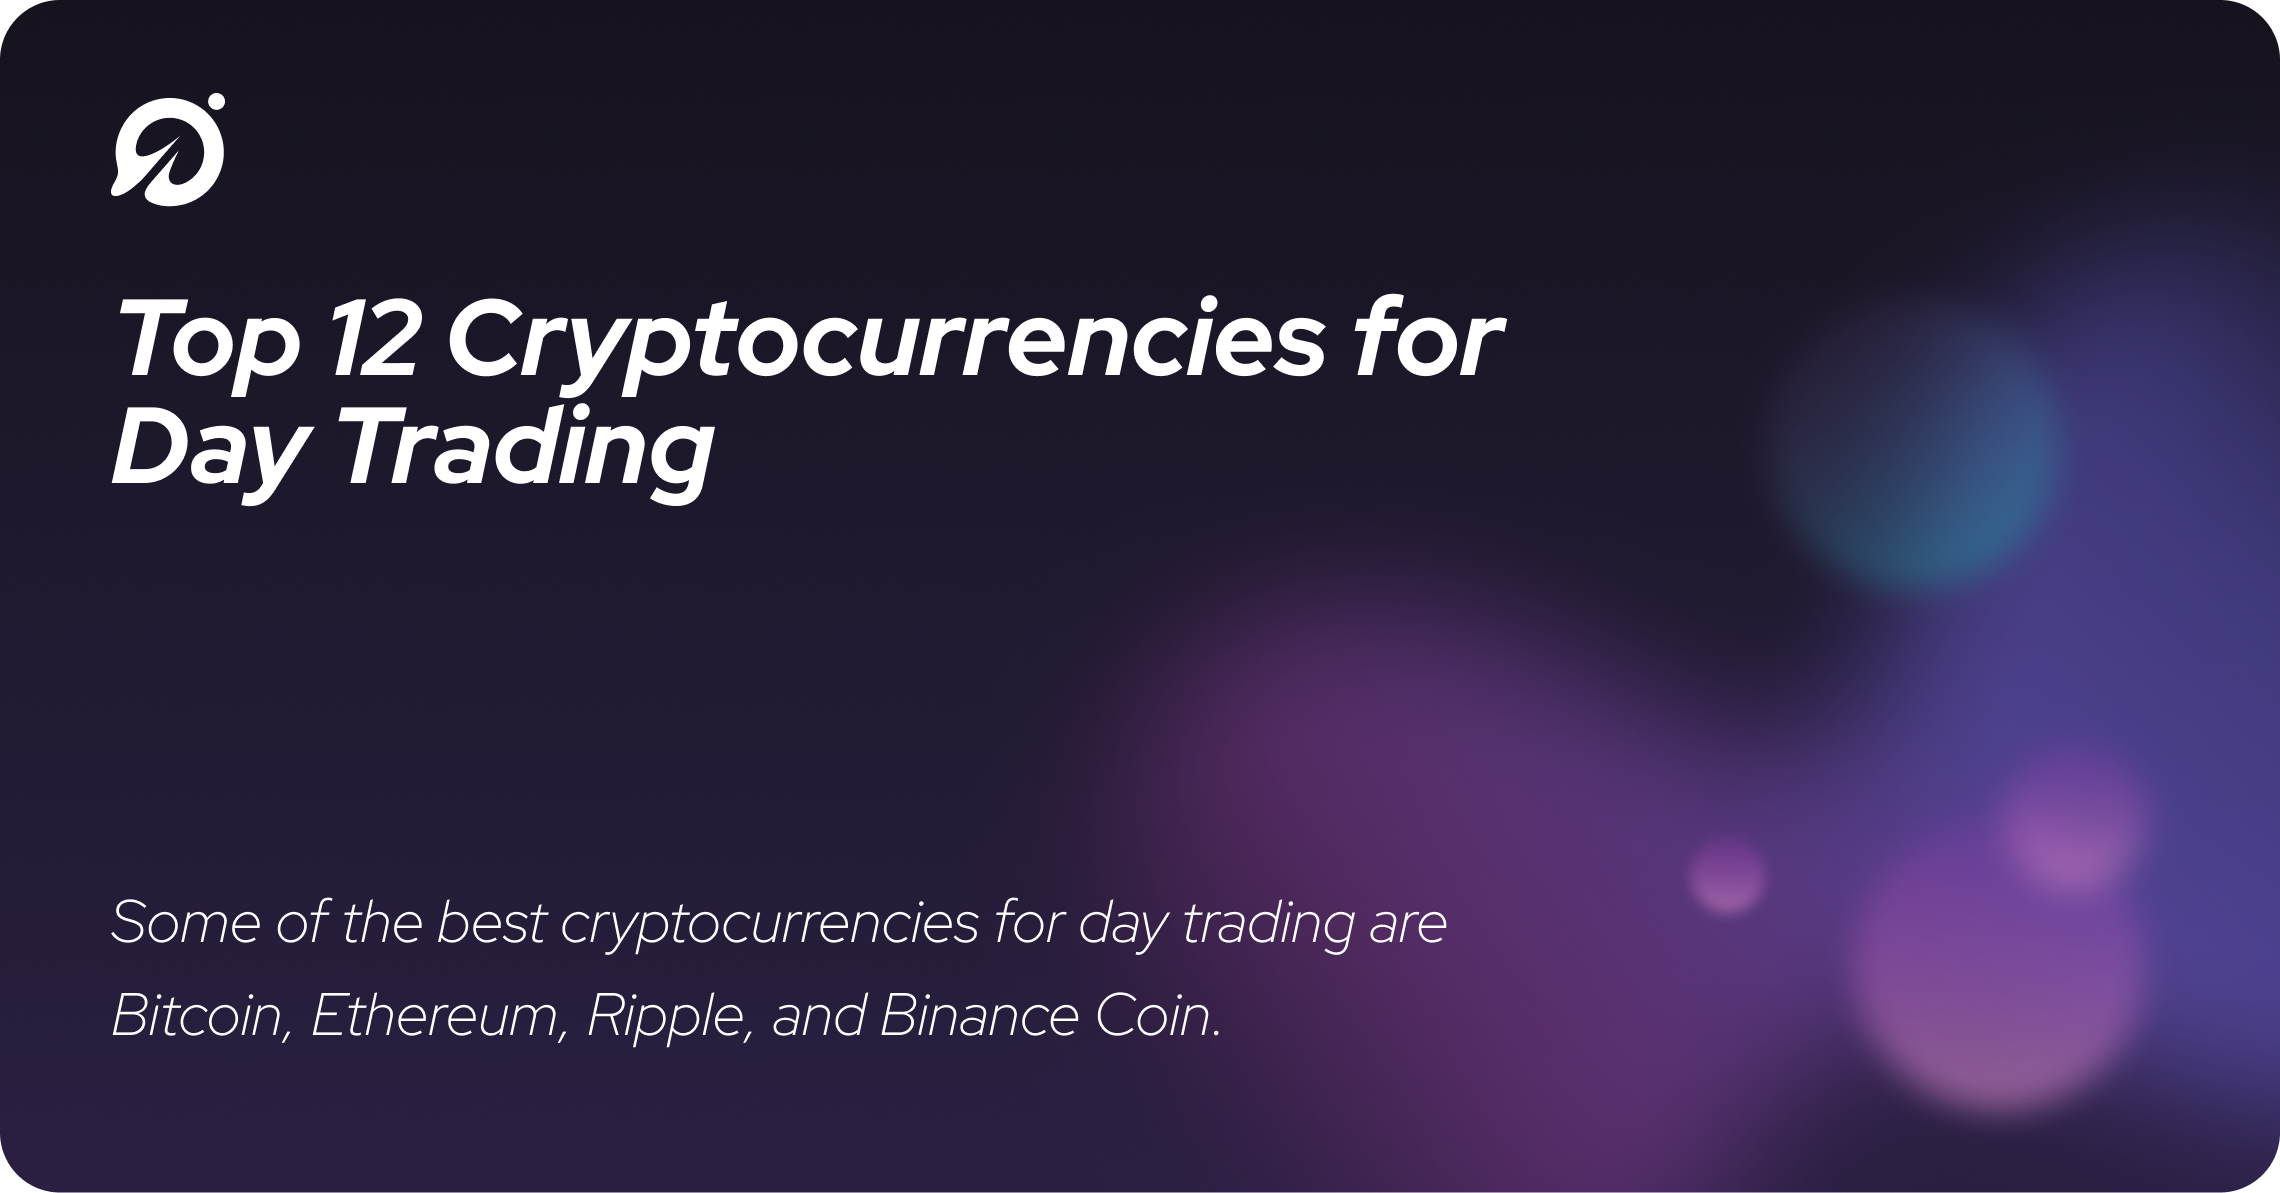 Top 12 Cryptocurrencies for Day Trading